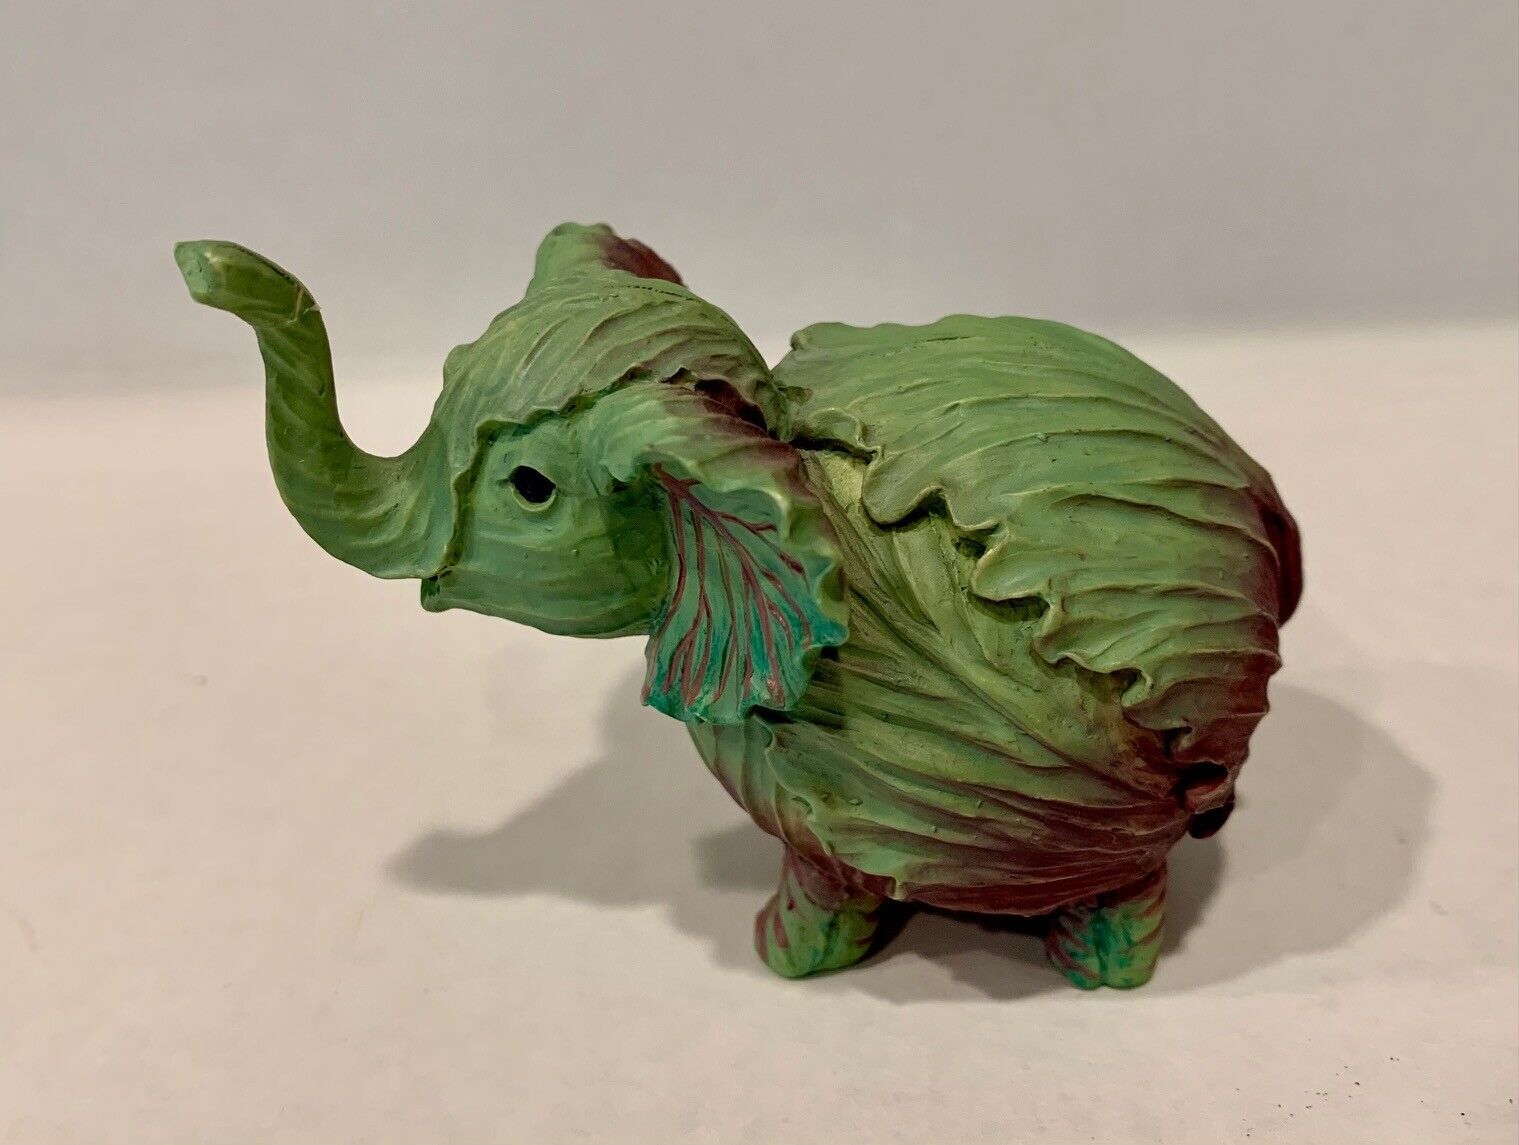 ENESCO HOME GROWN COLLECTIBLE Cabbage Elephant FIGURINE 4025389